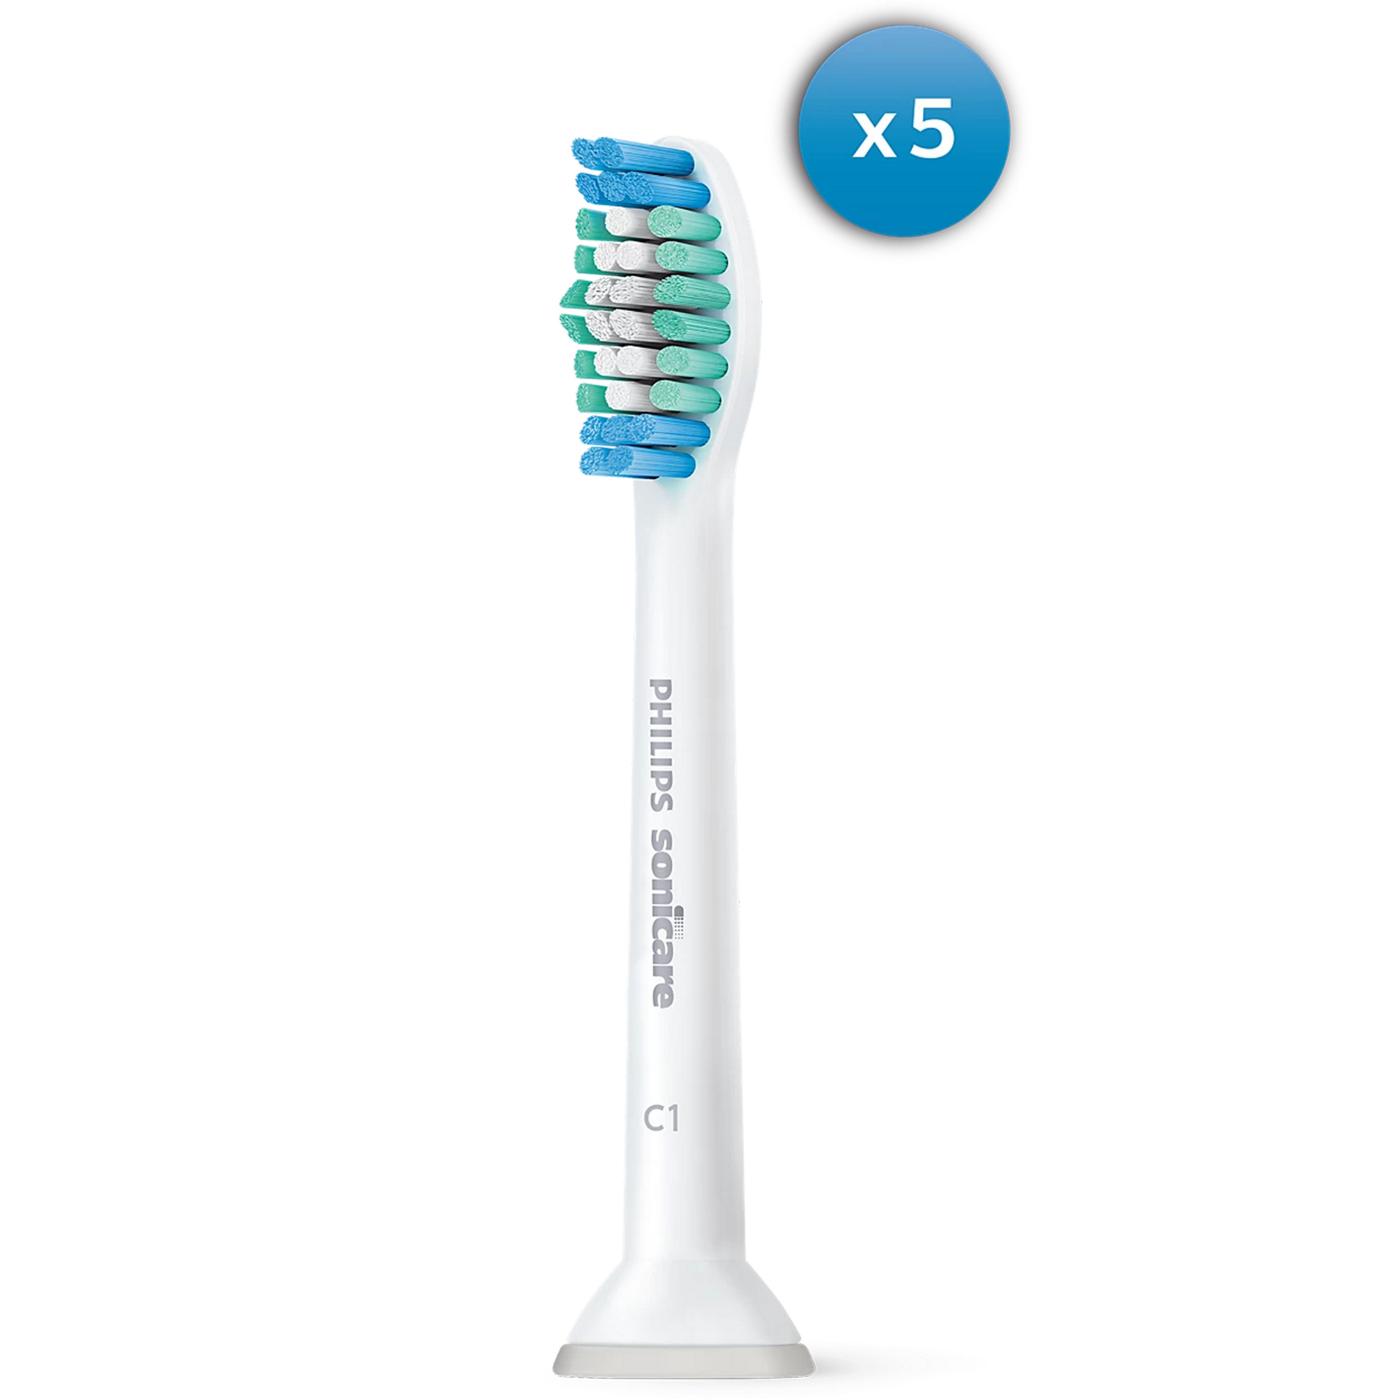 Philips Sonicare Simply Clean Brush Heads C1; image 3 of 3